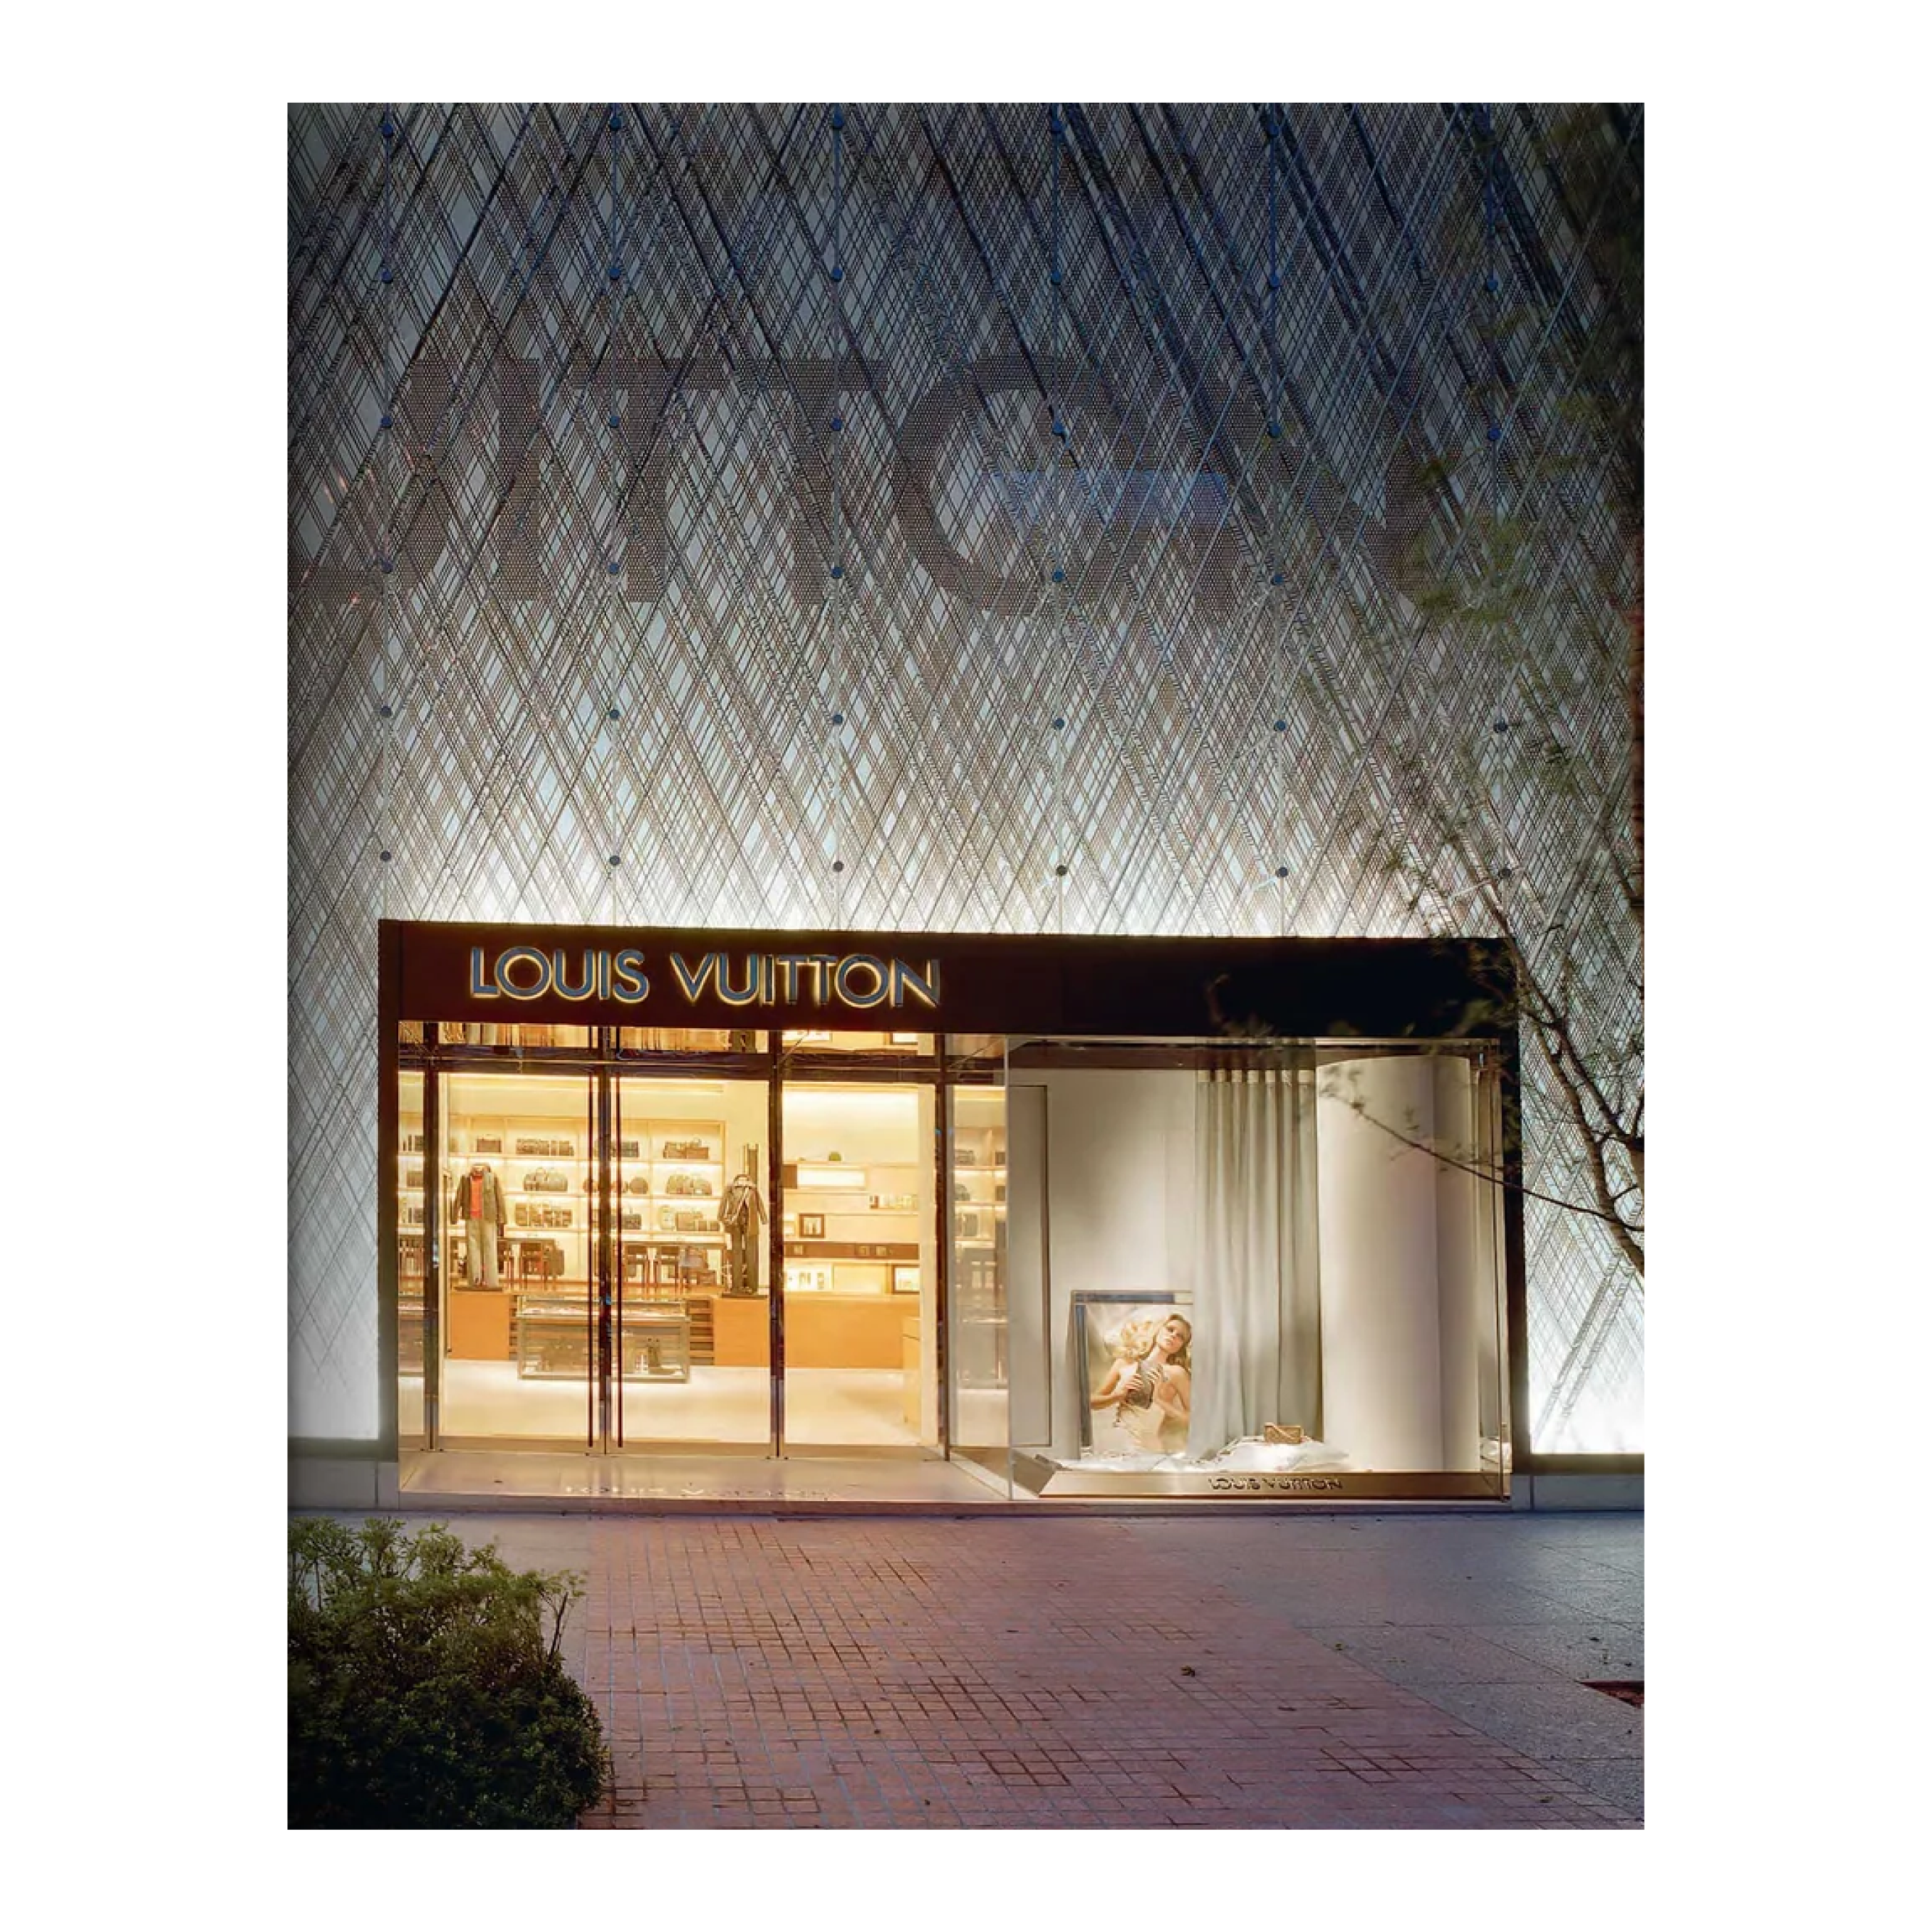 Buy Assouline 'Louis Vuitton Skin: Architecture of Luxury' Book - New York  Edition